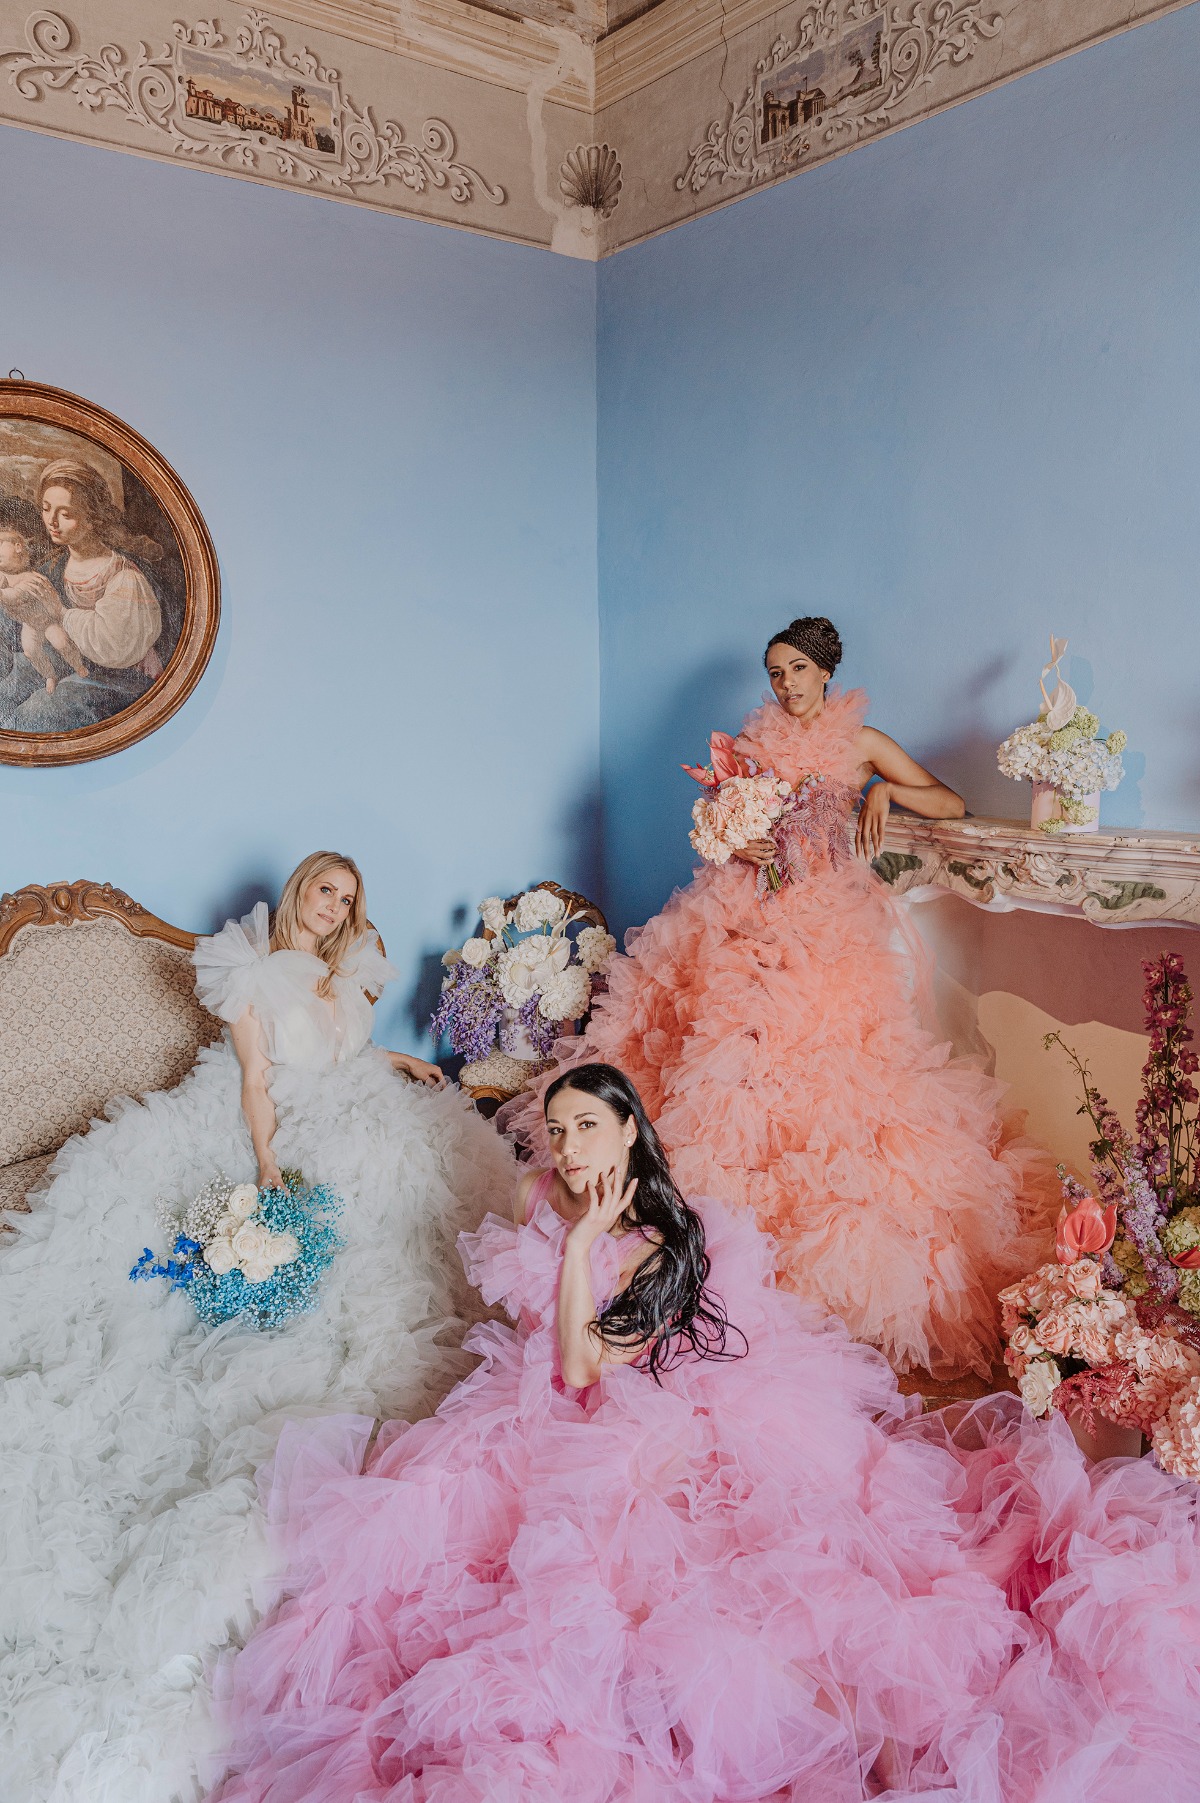 Portrait of three brides in pink, blue-gray, and orange ruffled wedding dresses holding bouquets